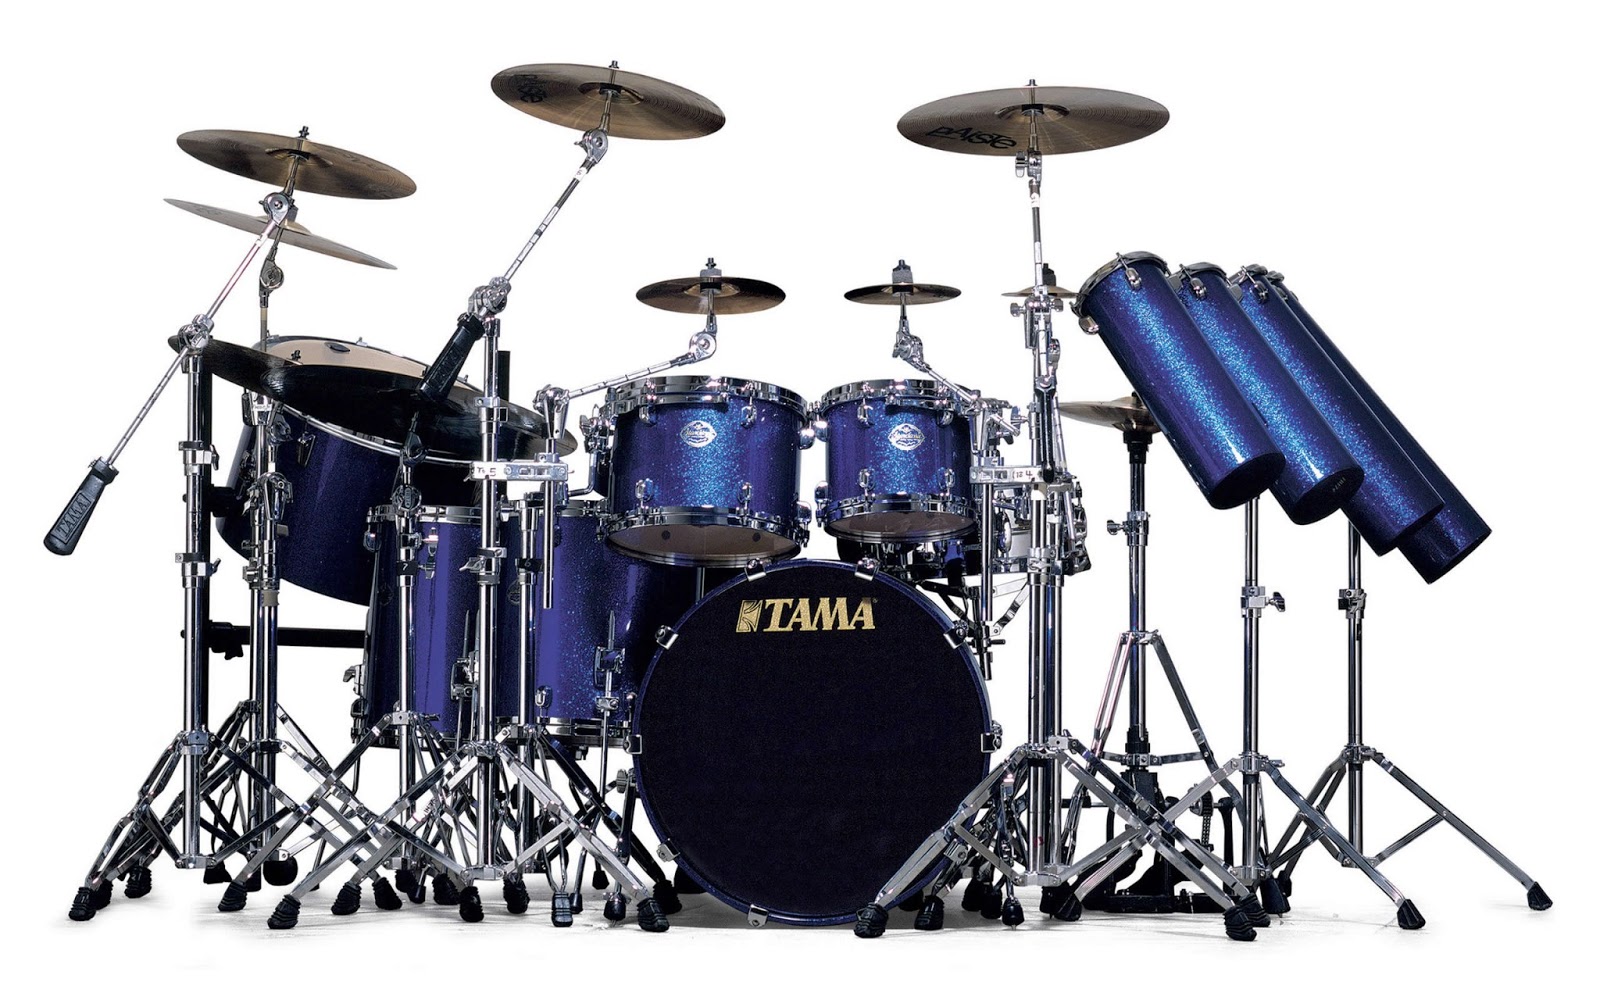 Musical Instruments Drums High Resolution Background Wallpaper